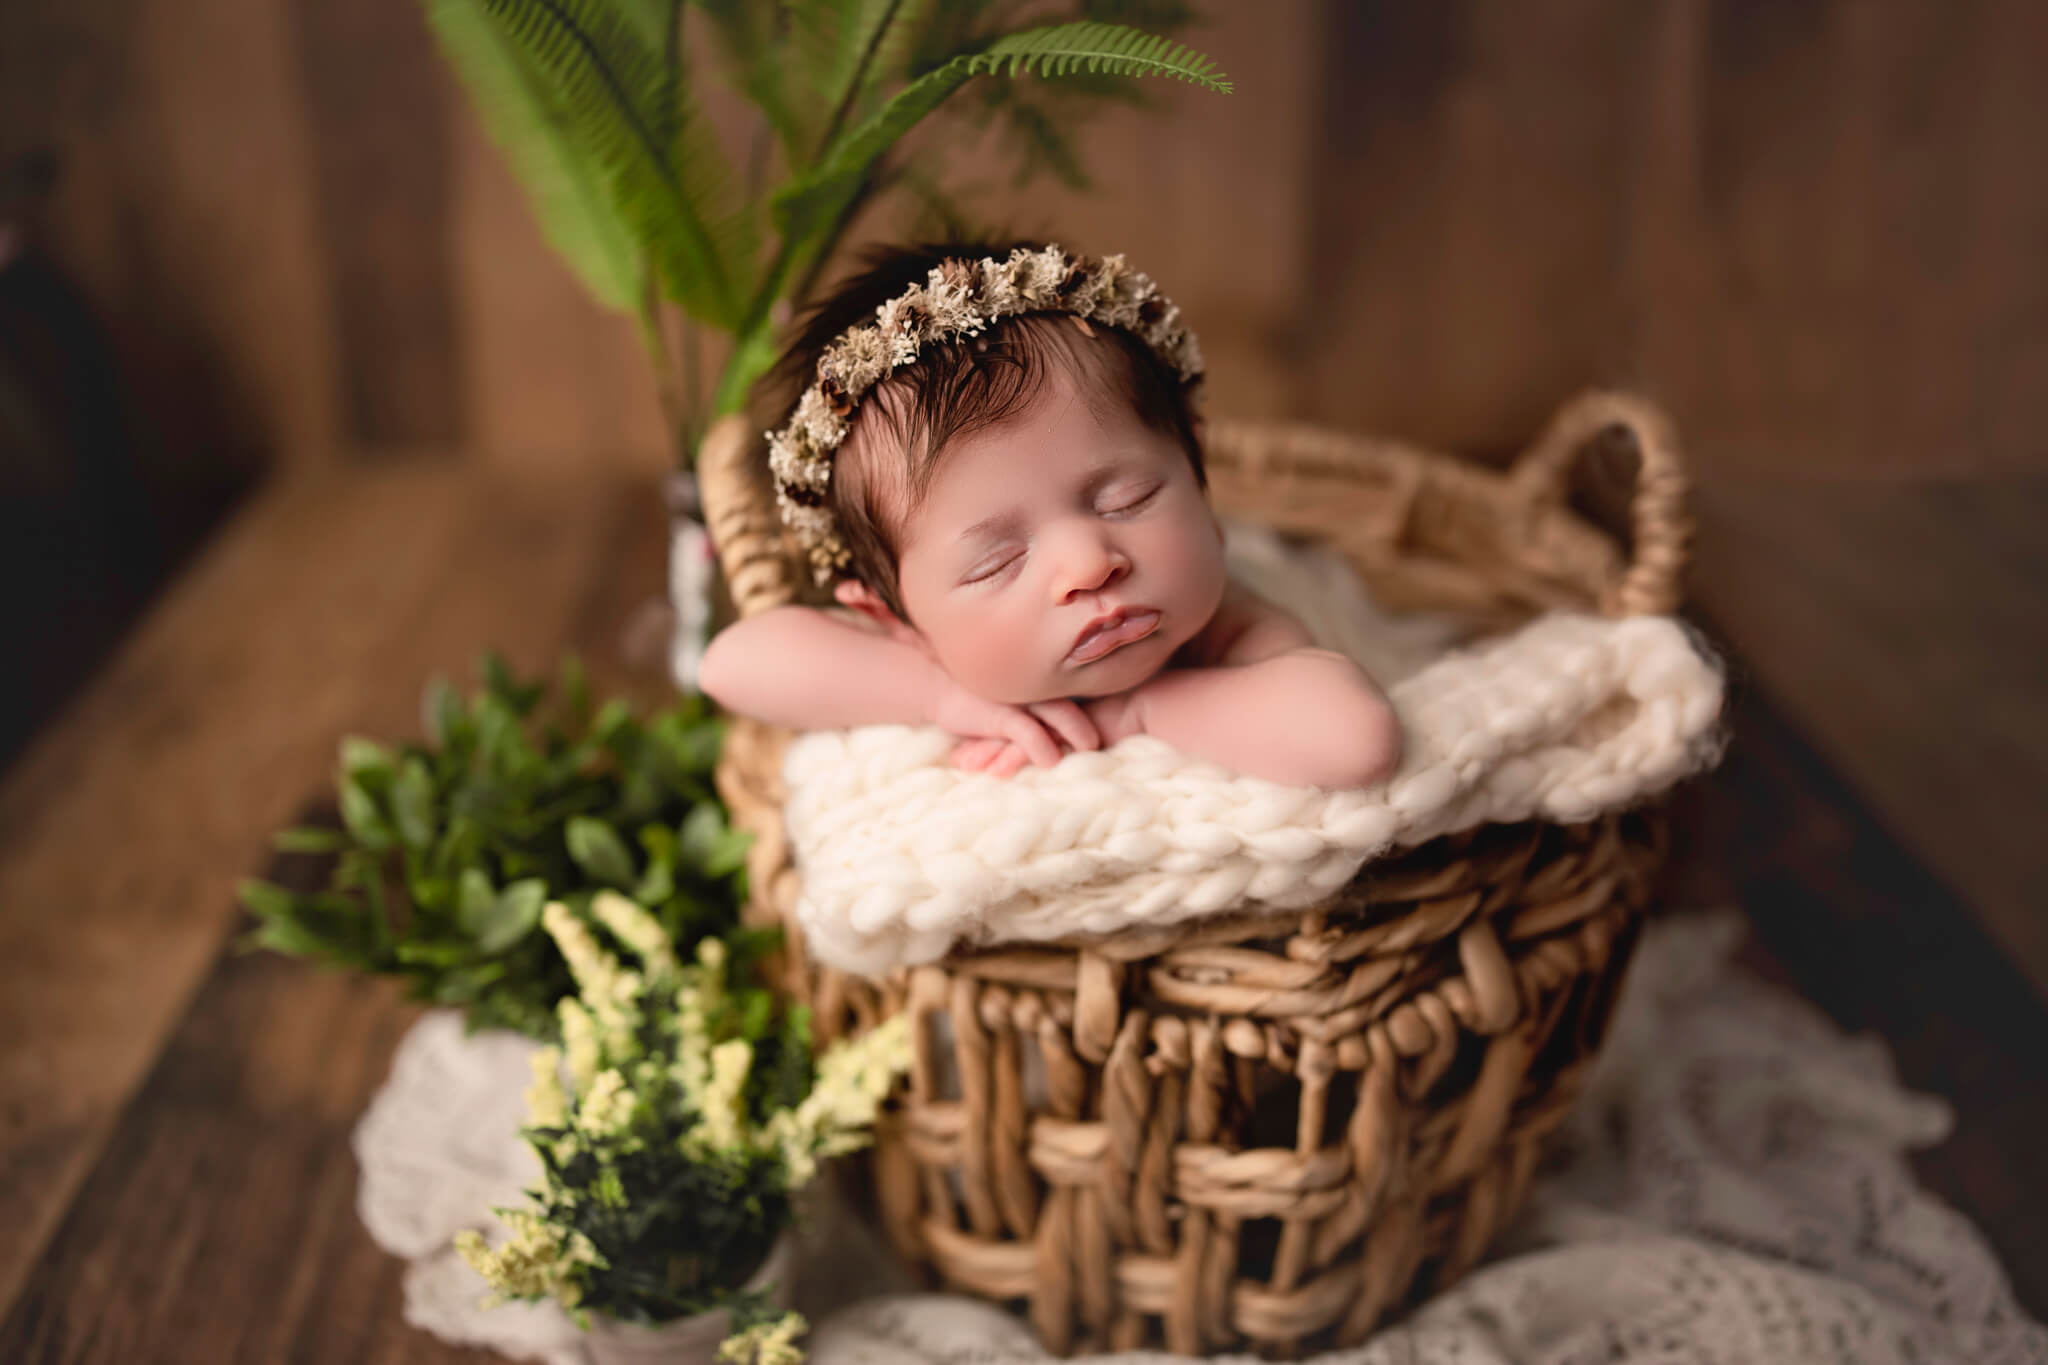 newborn photographer takes photo of baby in bamboo basket for hamilton baby store shoot